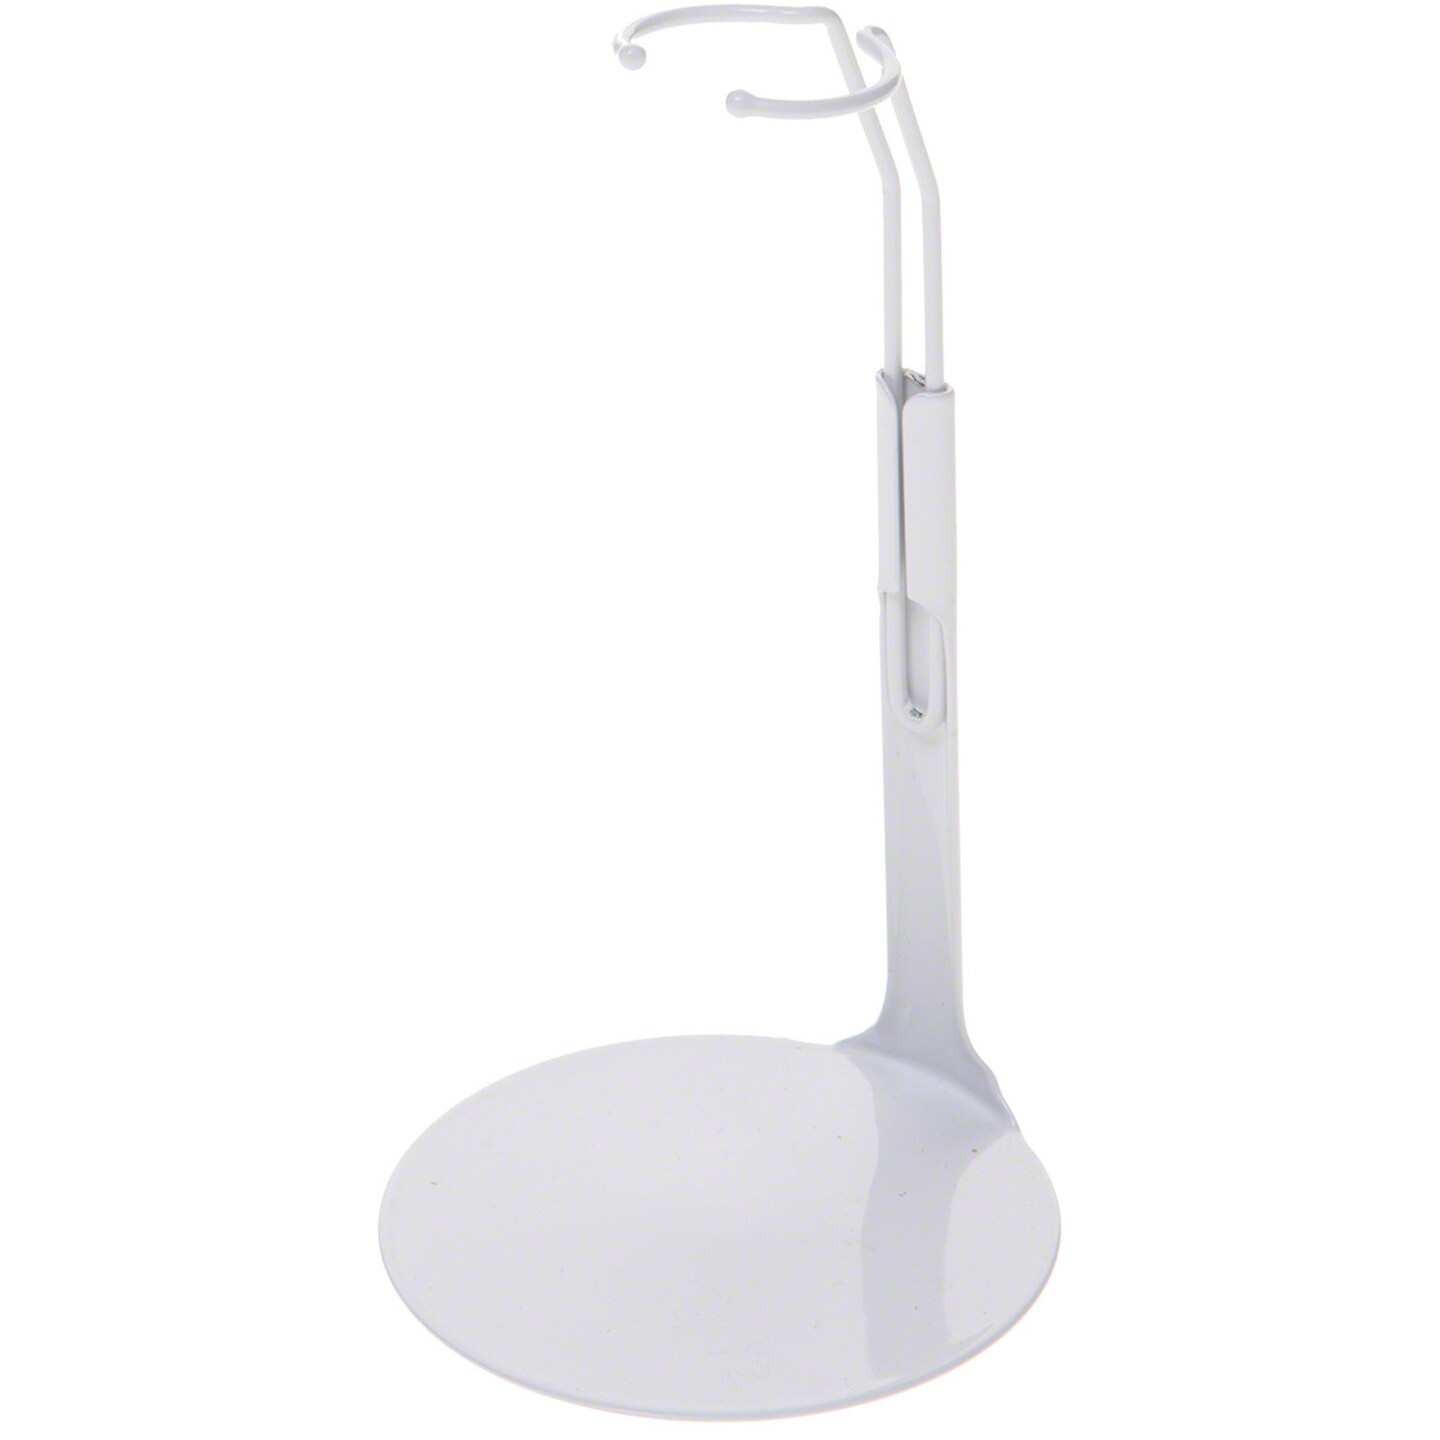 Kaiser 20SM White Adjustable Doll Stand, fits 7 to 8 inch Dolls or Action Figures, waist width adjusts from 1.125 to 1.375 inches